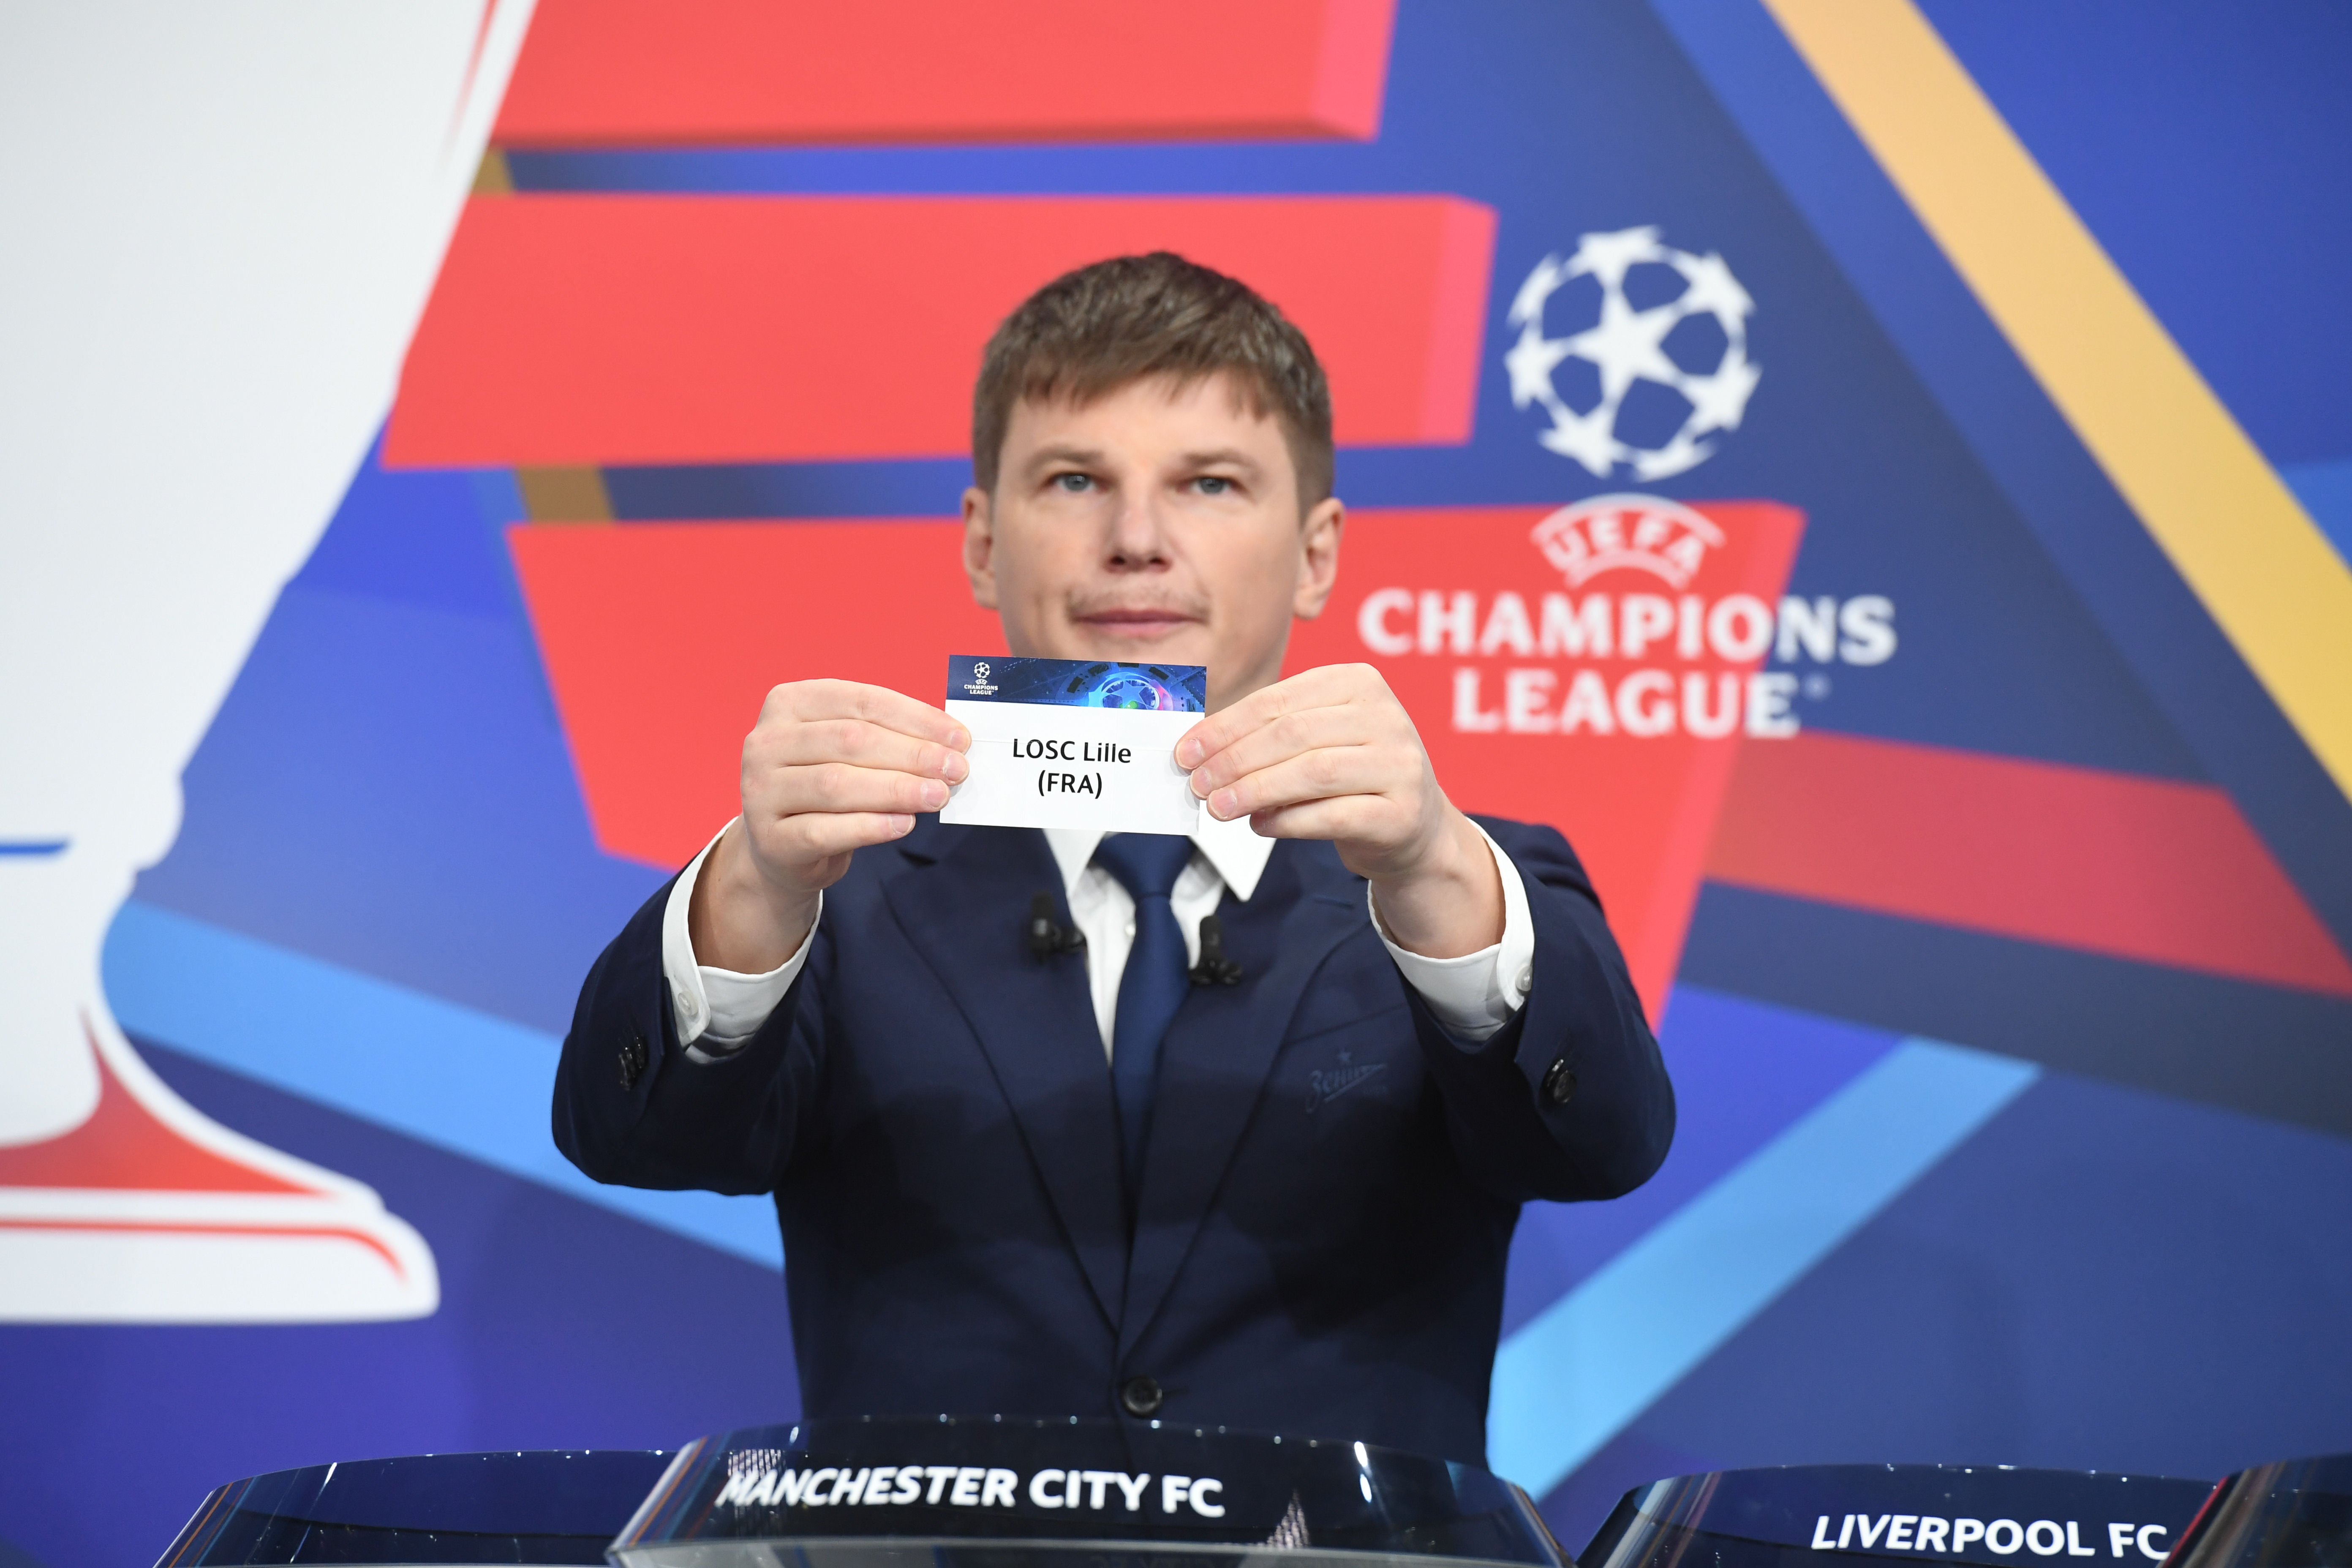 UEFA Champions League 2021/22 Round of 16 Draw